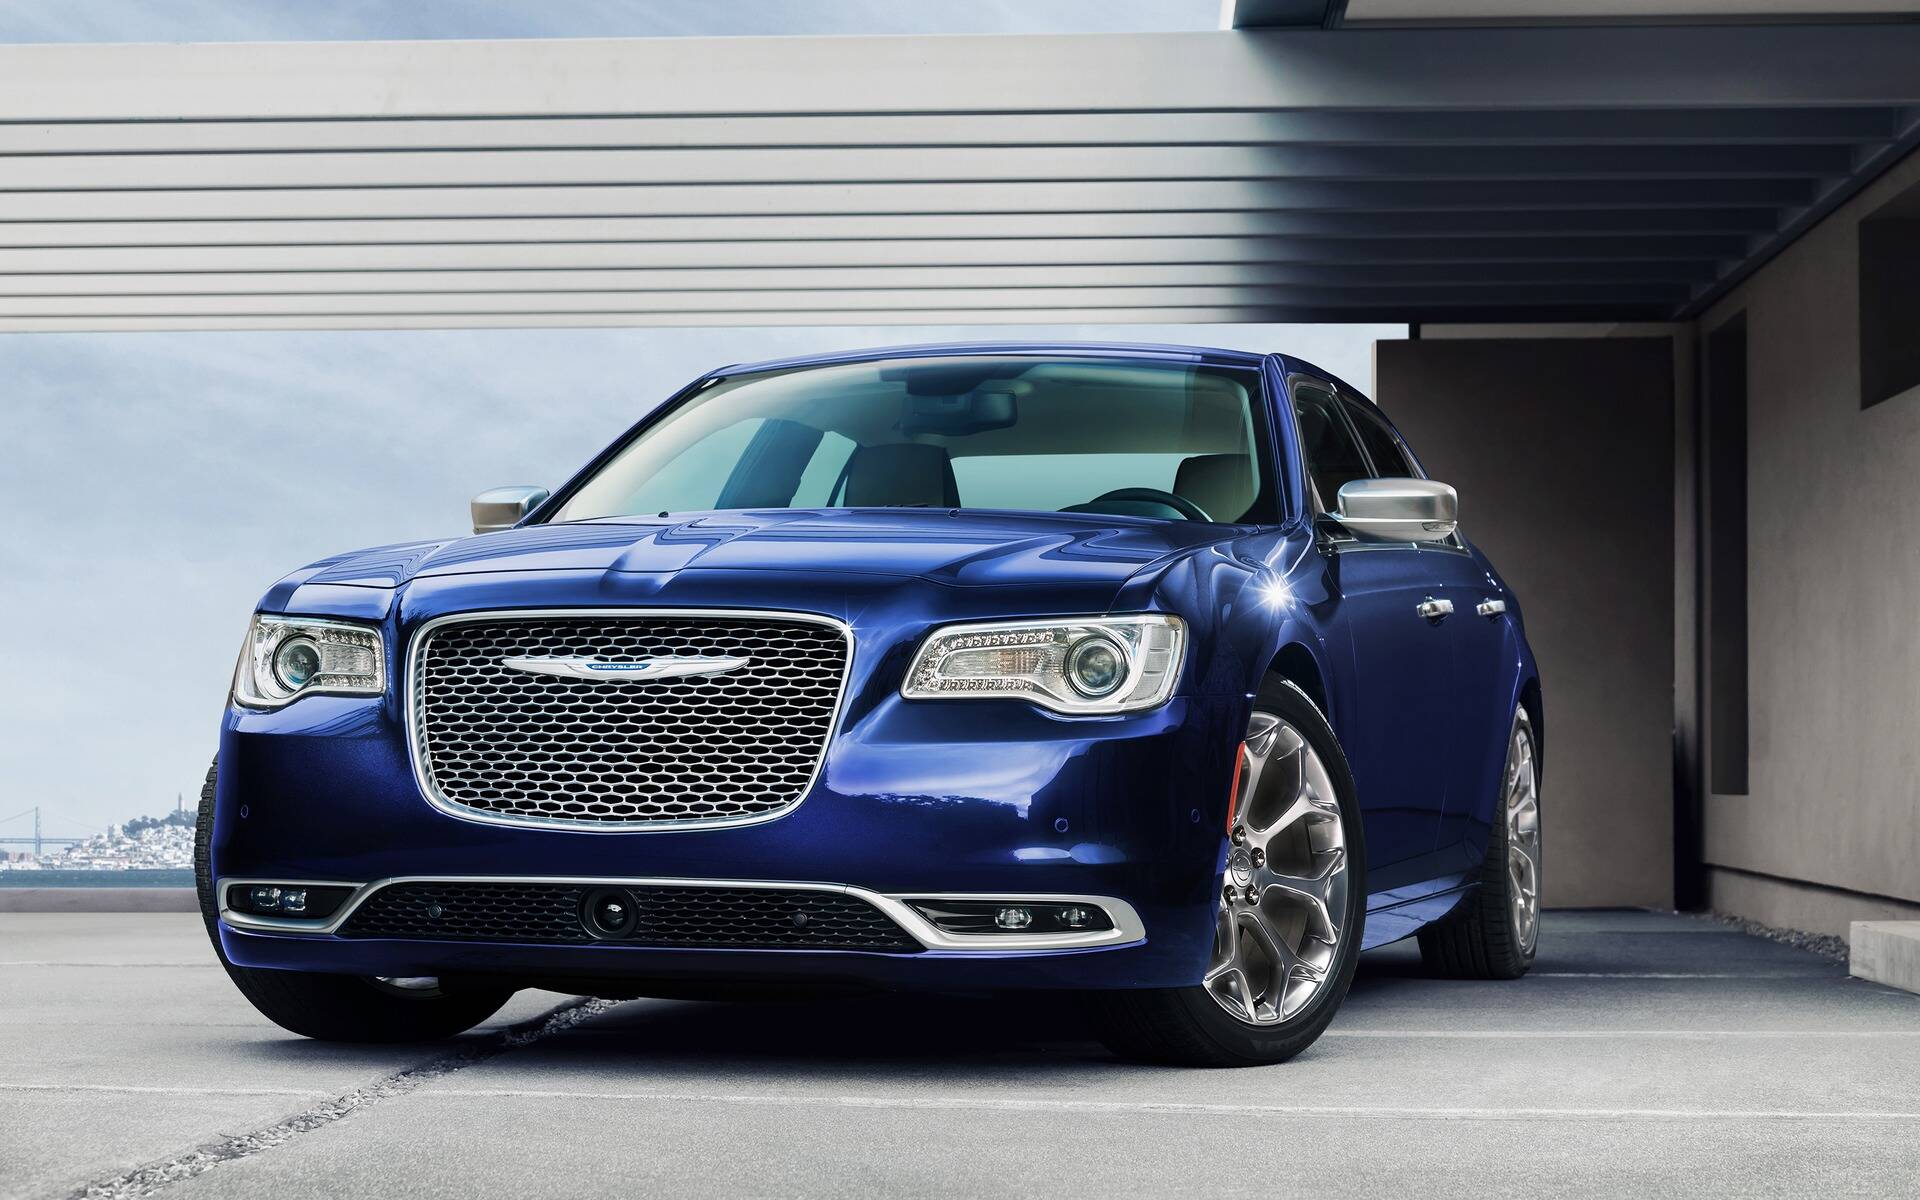 2021 Chrysler 300 Pricing Specs And Review Wallace Chrysler Jeep Dodge Ram Blog